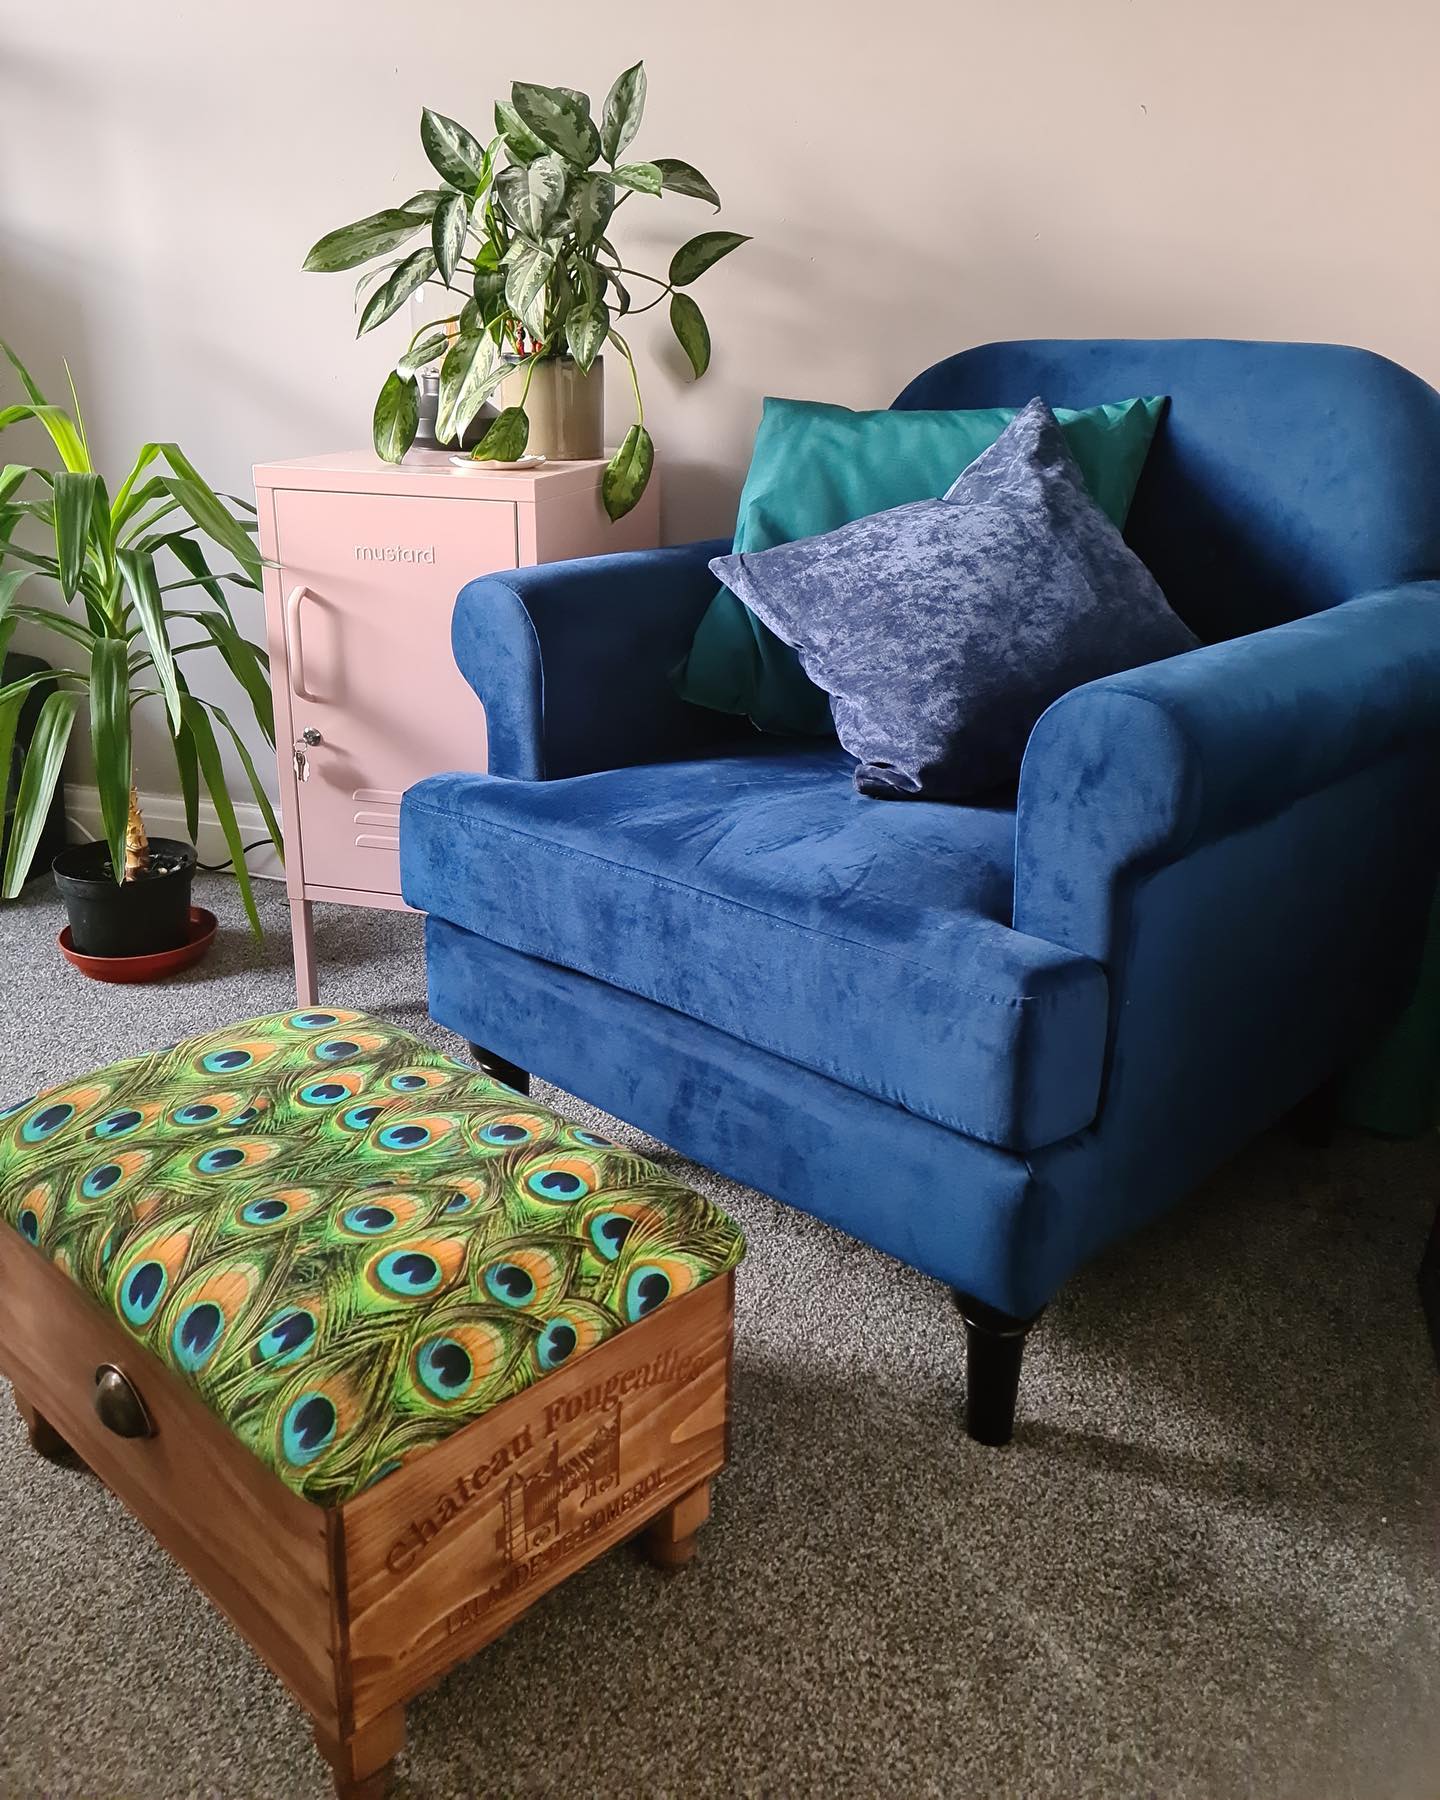 We received this gorgeous photo today of one of our ottomans in its new home  what a lovely relaxing spot to pop your feet up! We are still taking orders through our website, although these will now be processed in the new year while we take a short festive break. Thanks again for all your support for our little business! #christmas2021 #handcraftedhomewares #gingerandtweed #bespoke #peacock #beautifulfabric #craftspace #homedecor